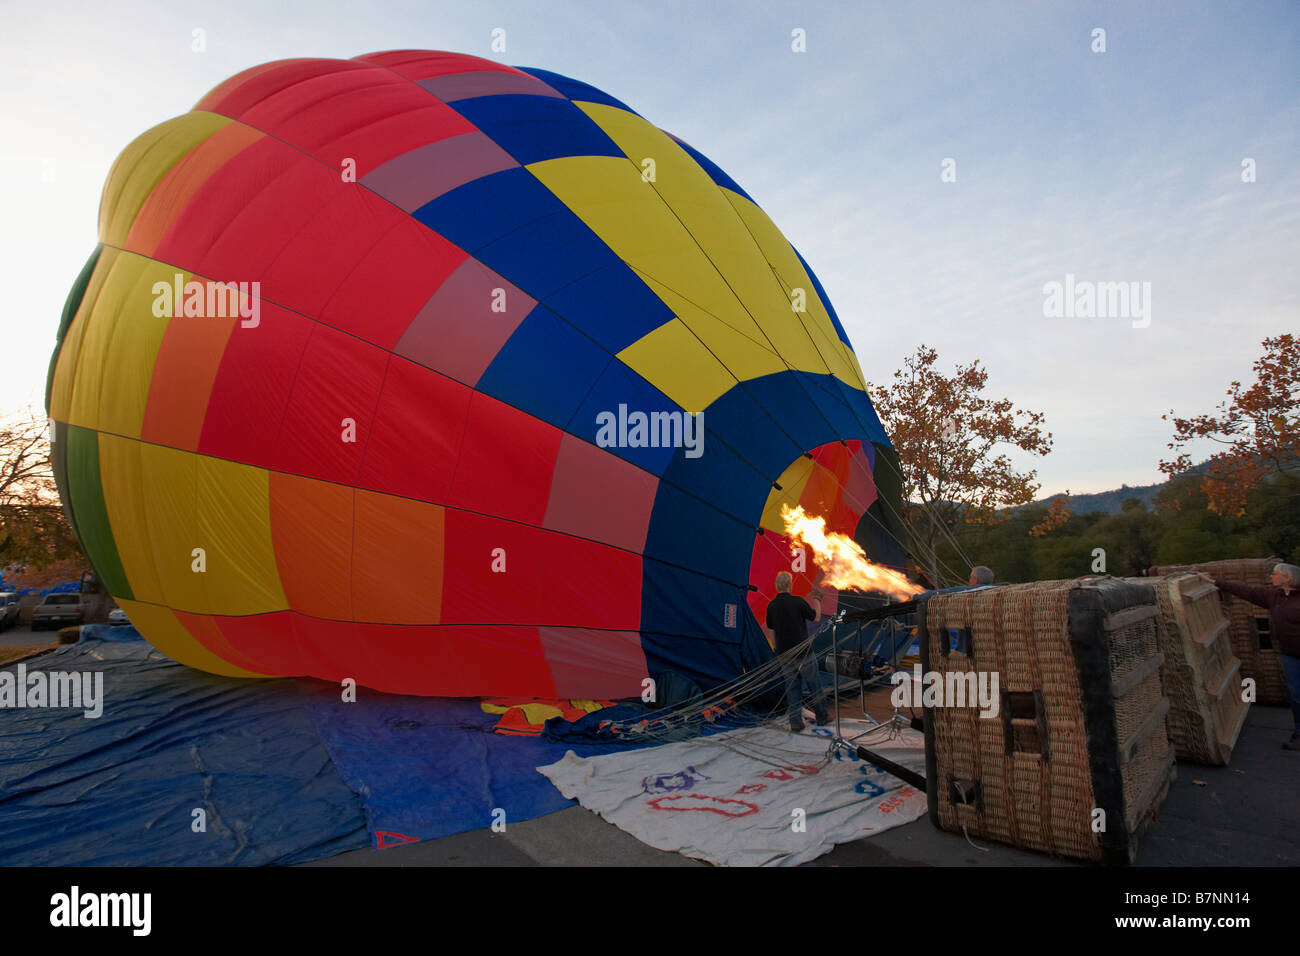 Hot air balloon being inflated for a flight Napa Valley. California, USA. Stock Photo